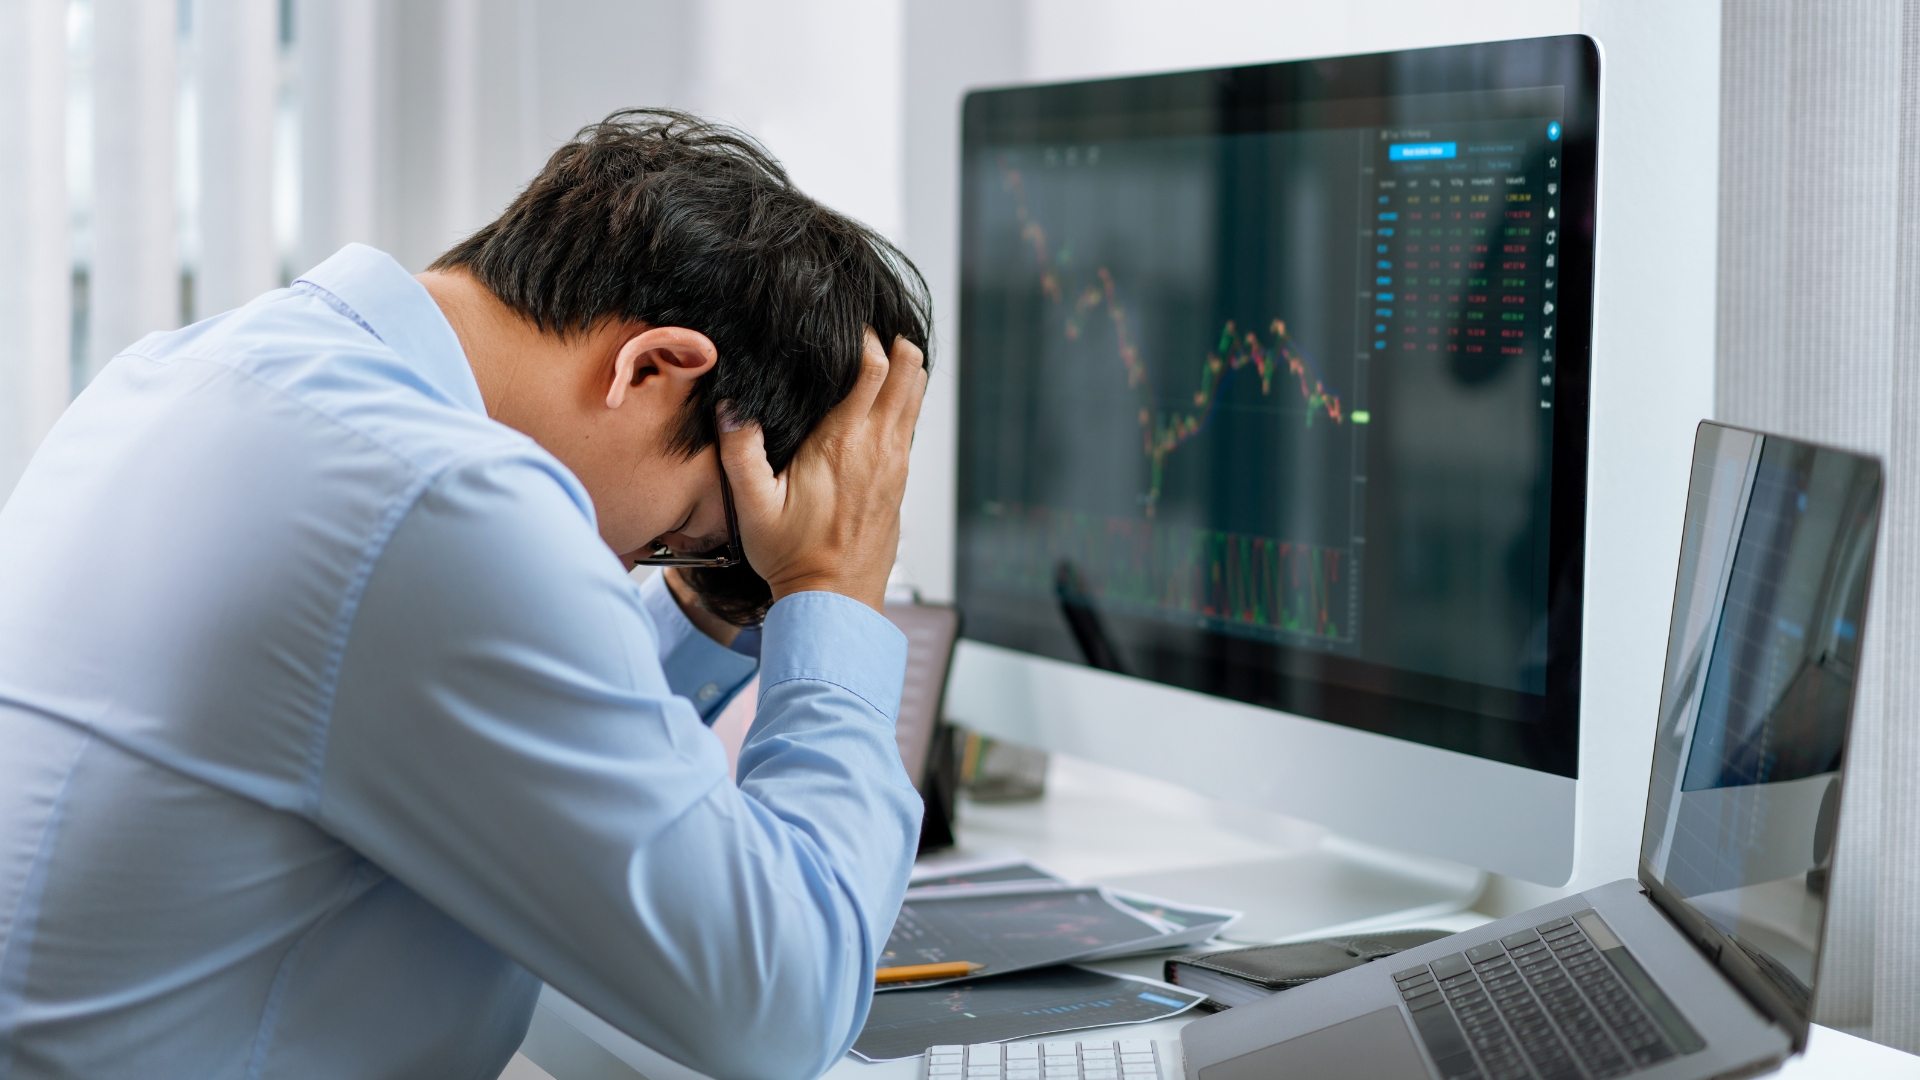 A new study uncovers record peaks of financial stress affecting American workers